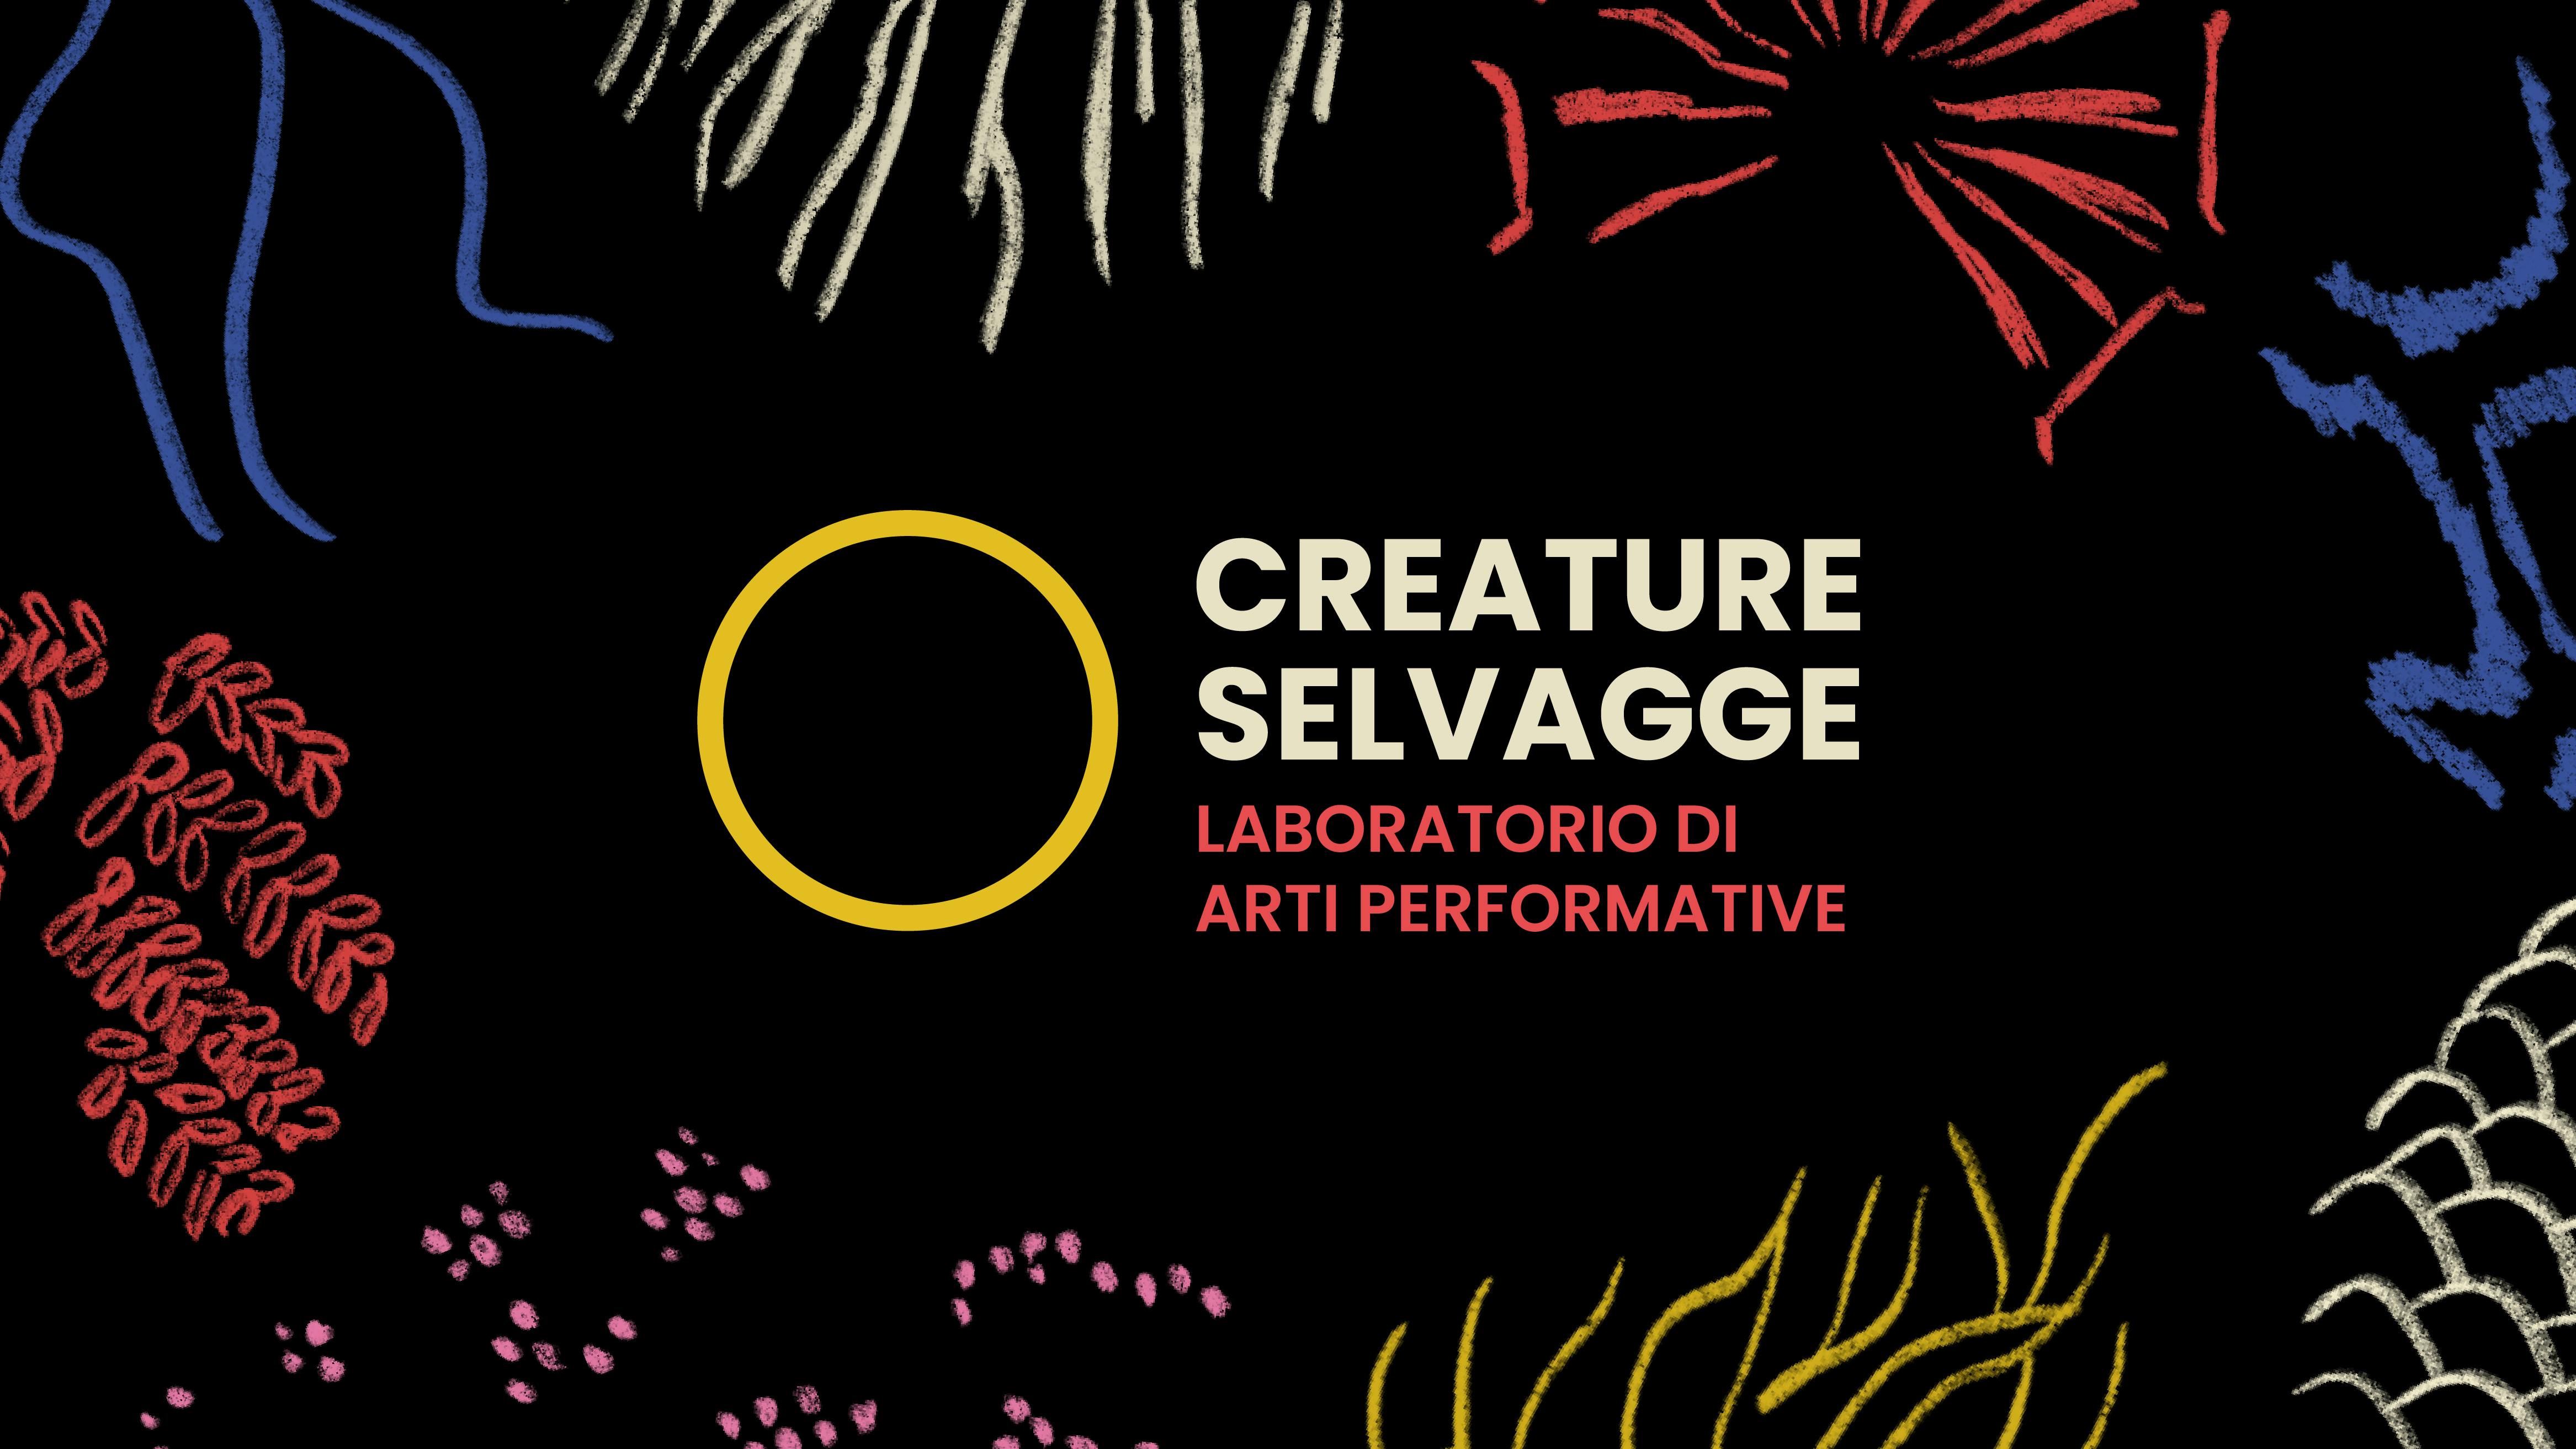 Creature Selvagge graphics on a black background with writing in the centre and colourful designs around